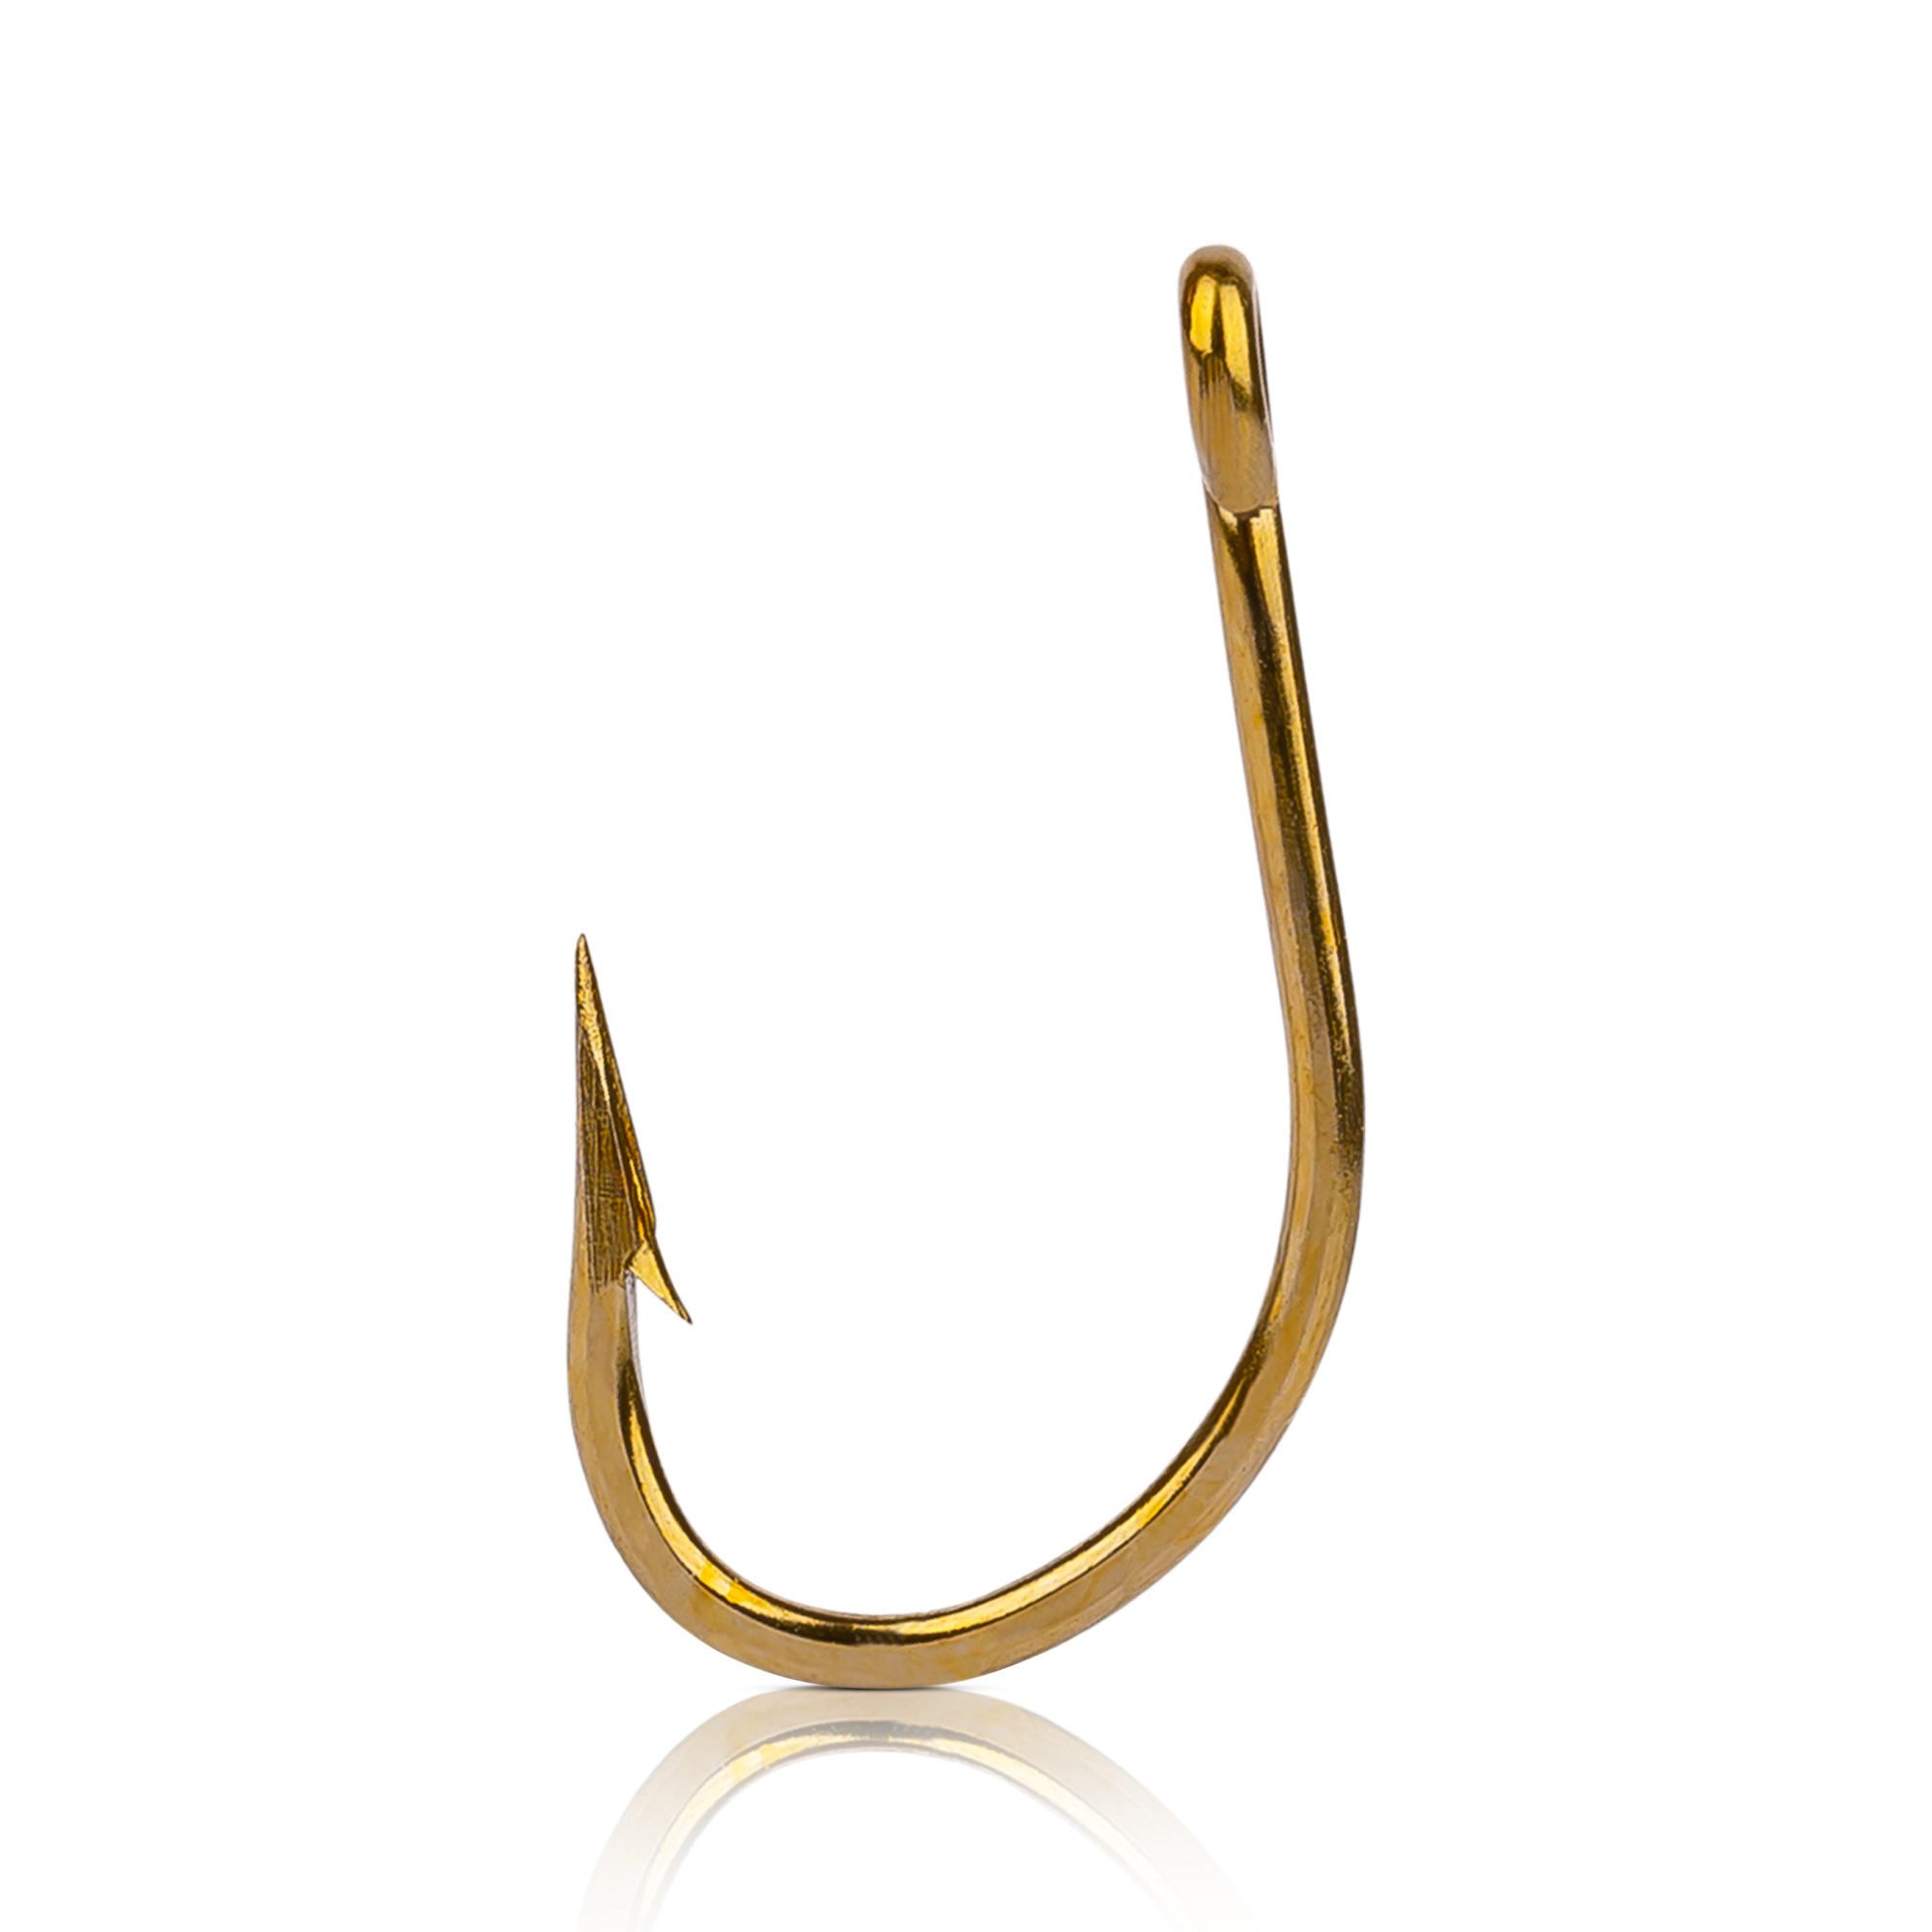 O'Shaughnessy Live Bait Hook